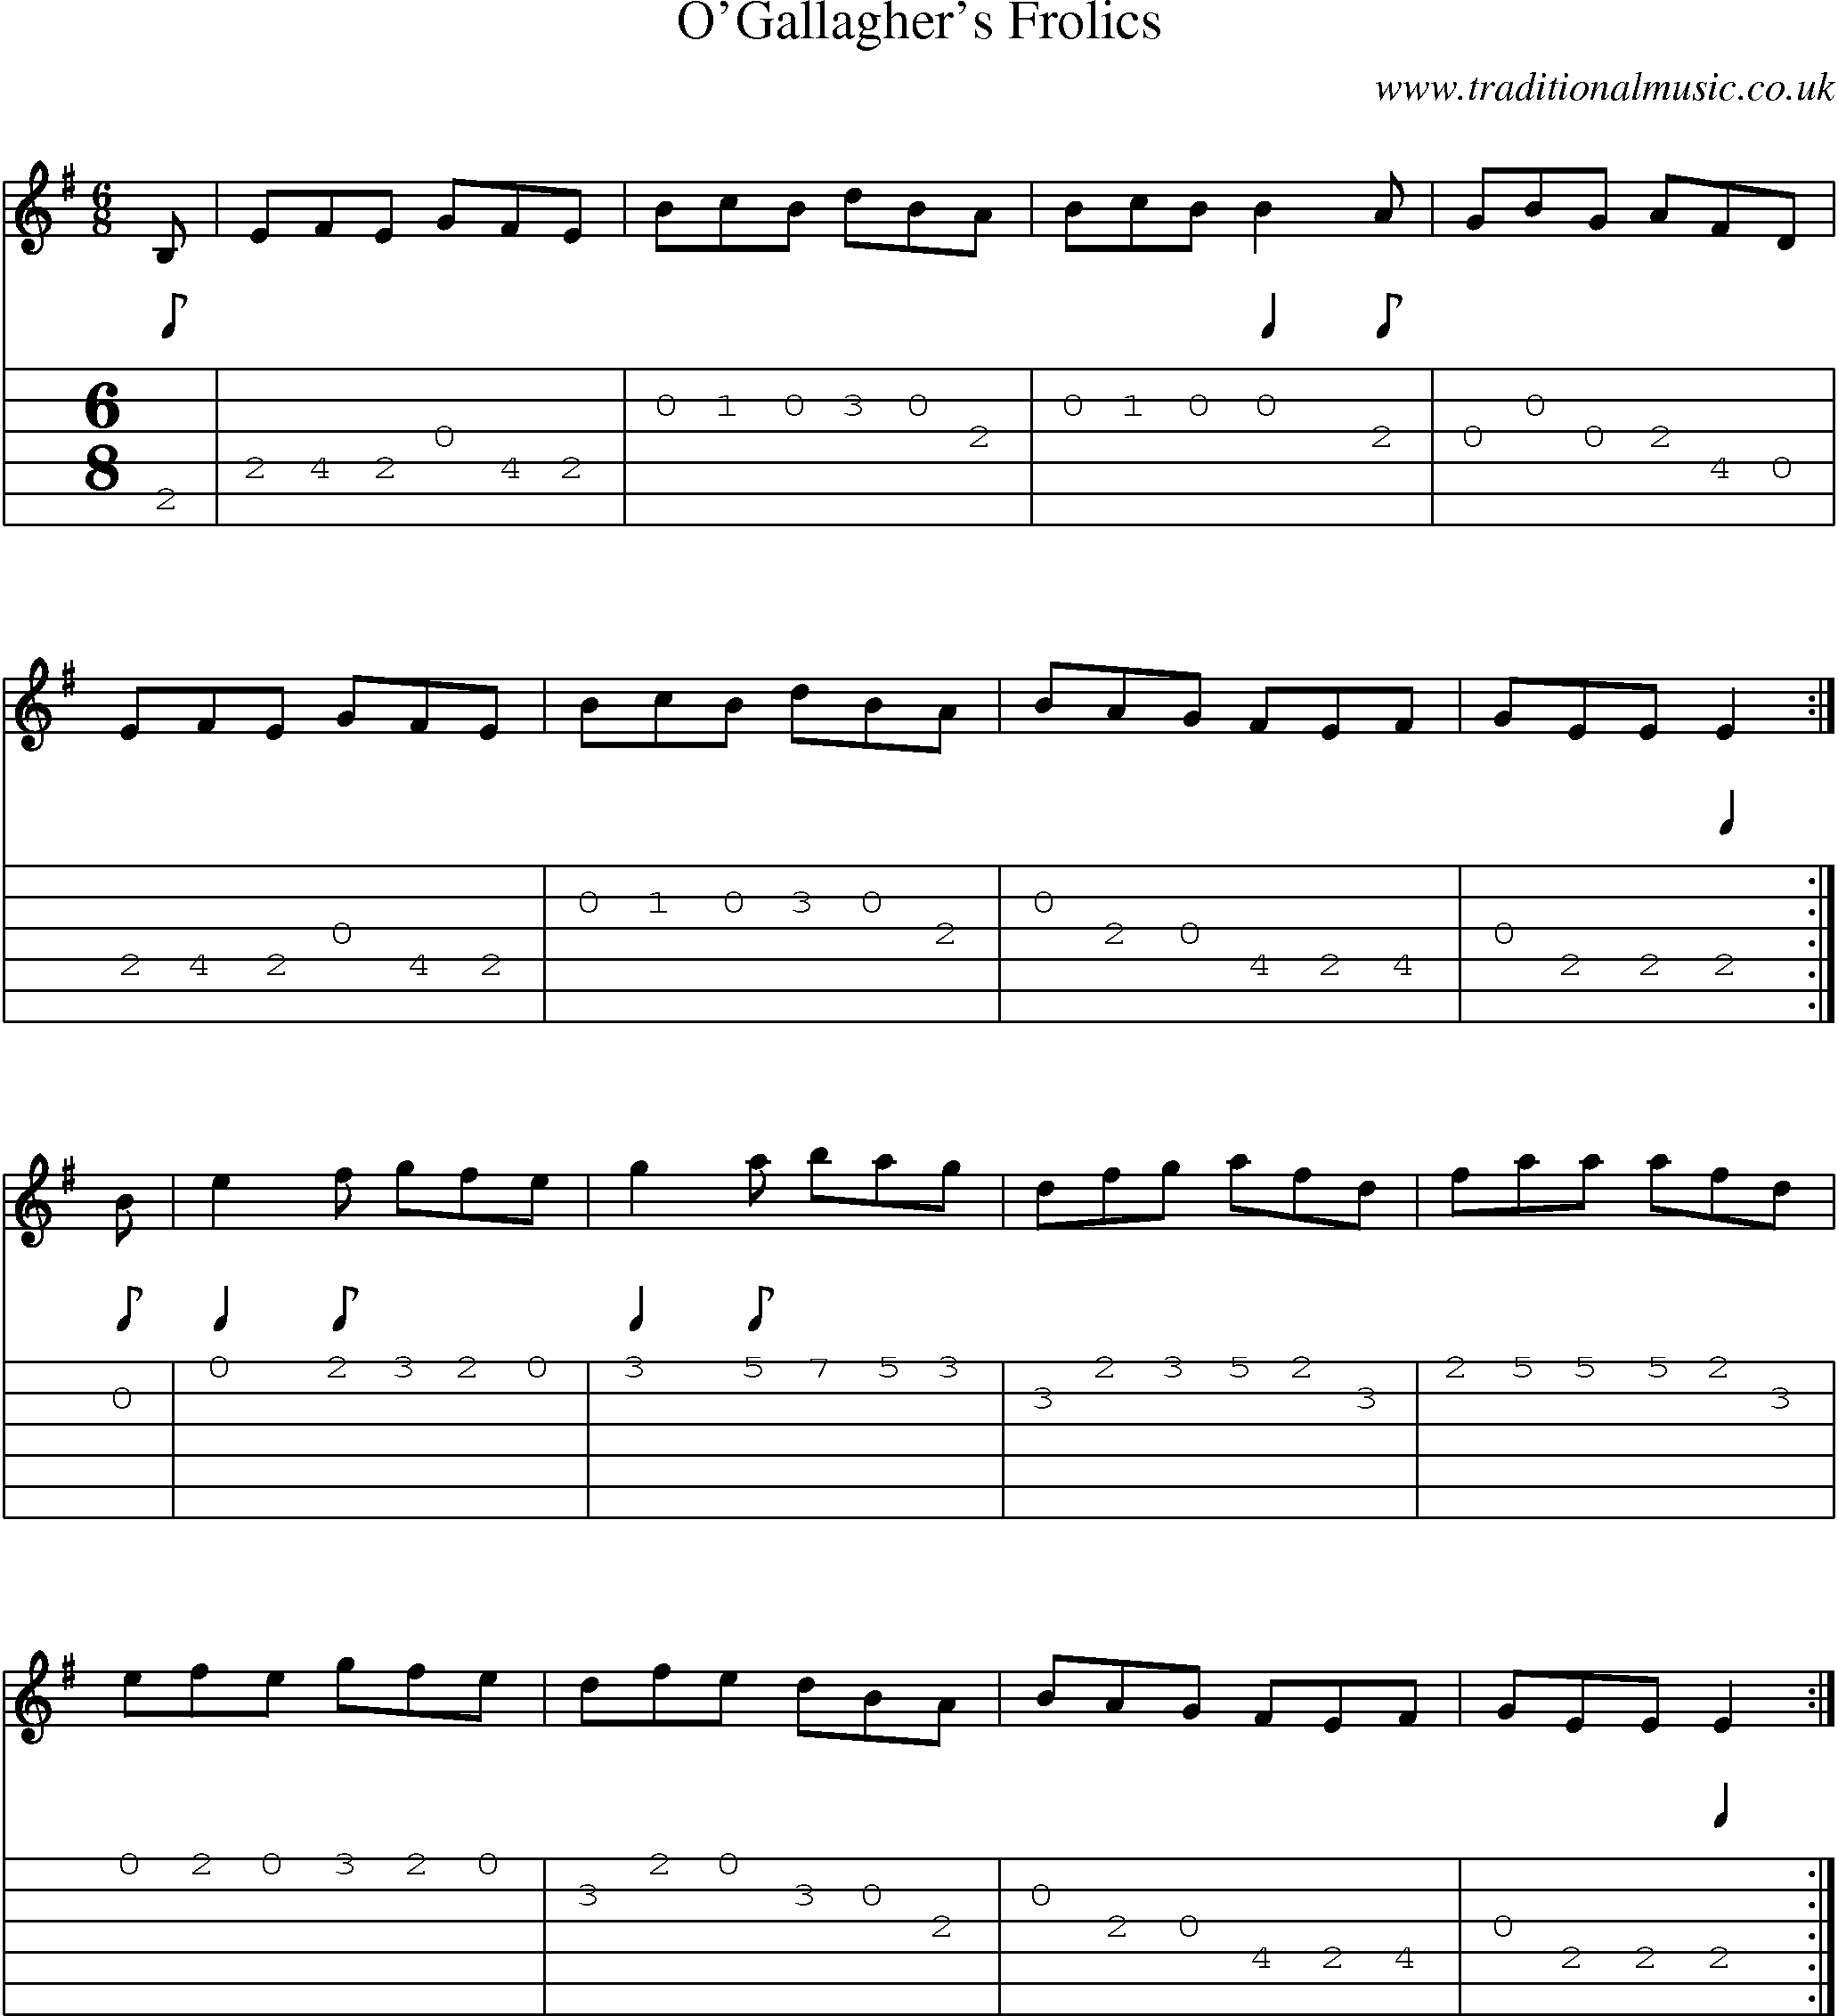 Music Score and Guitar Tabs for Ogallaghers Frolics